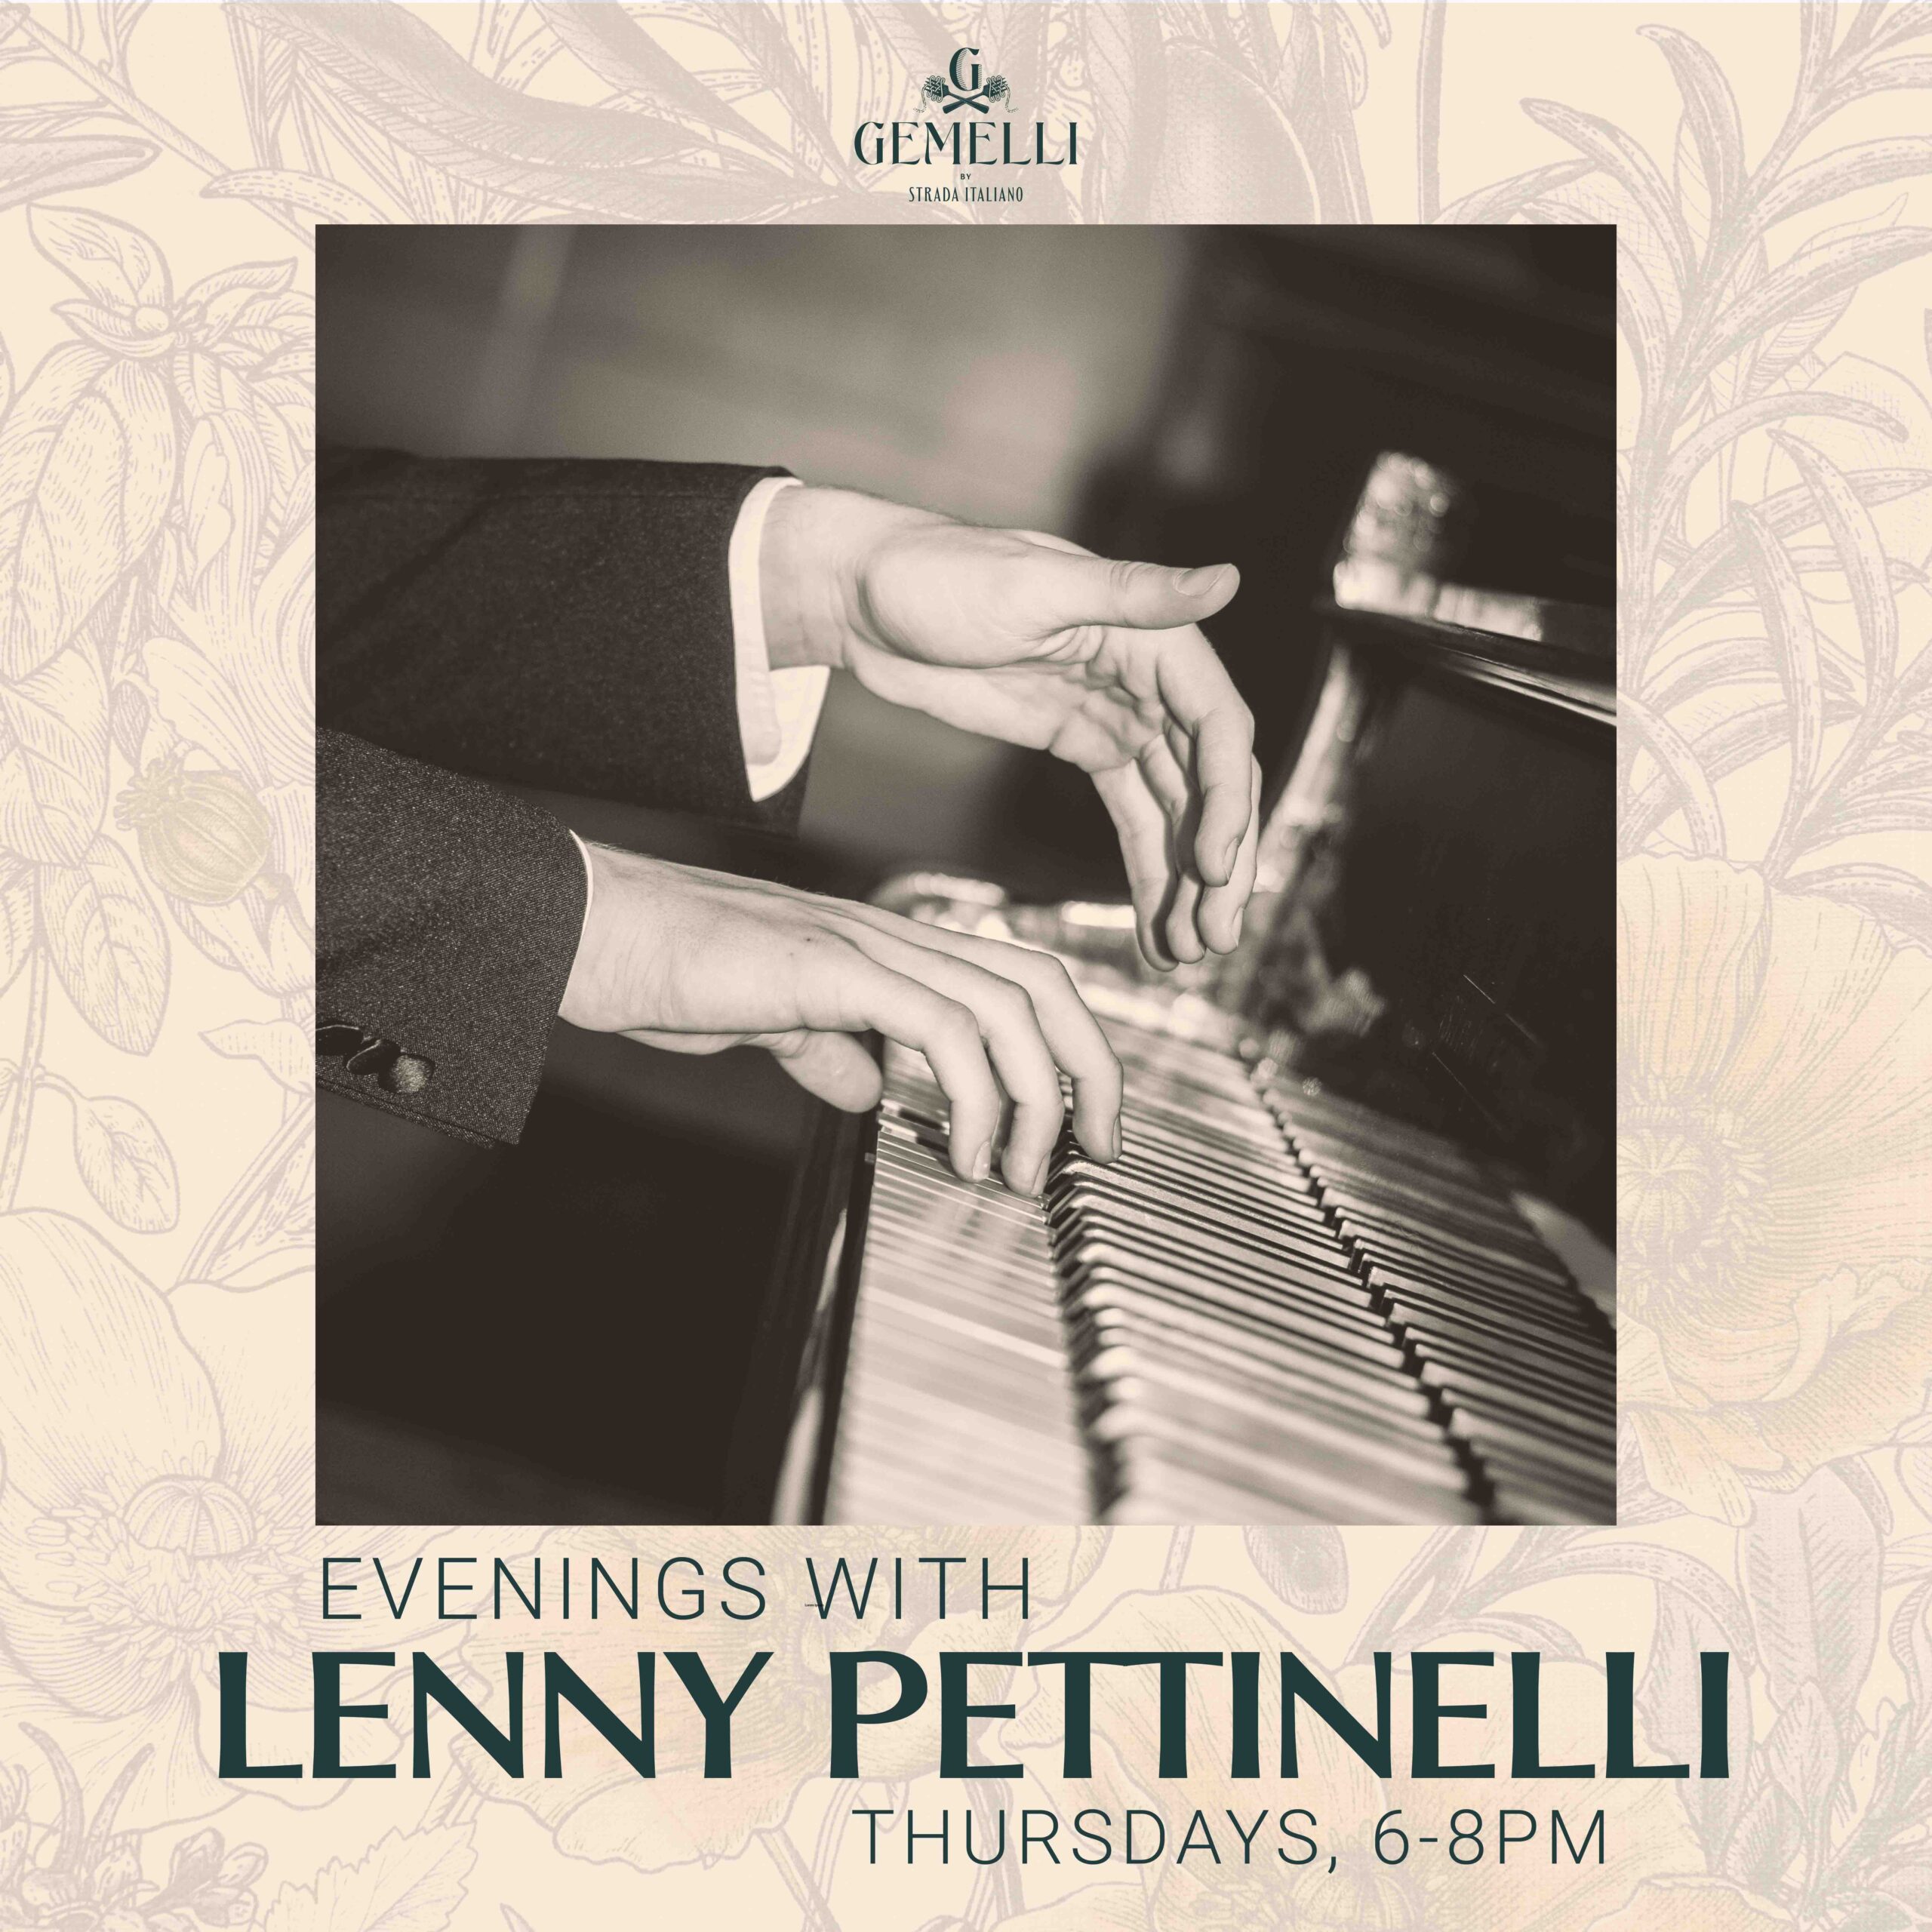 Dinner, Drinks & Live Music with Lenny Pettinelli • Thursdays, 6-8pm